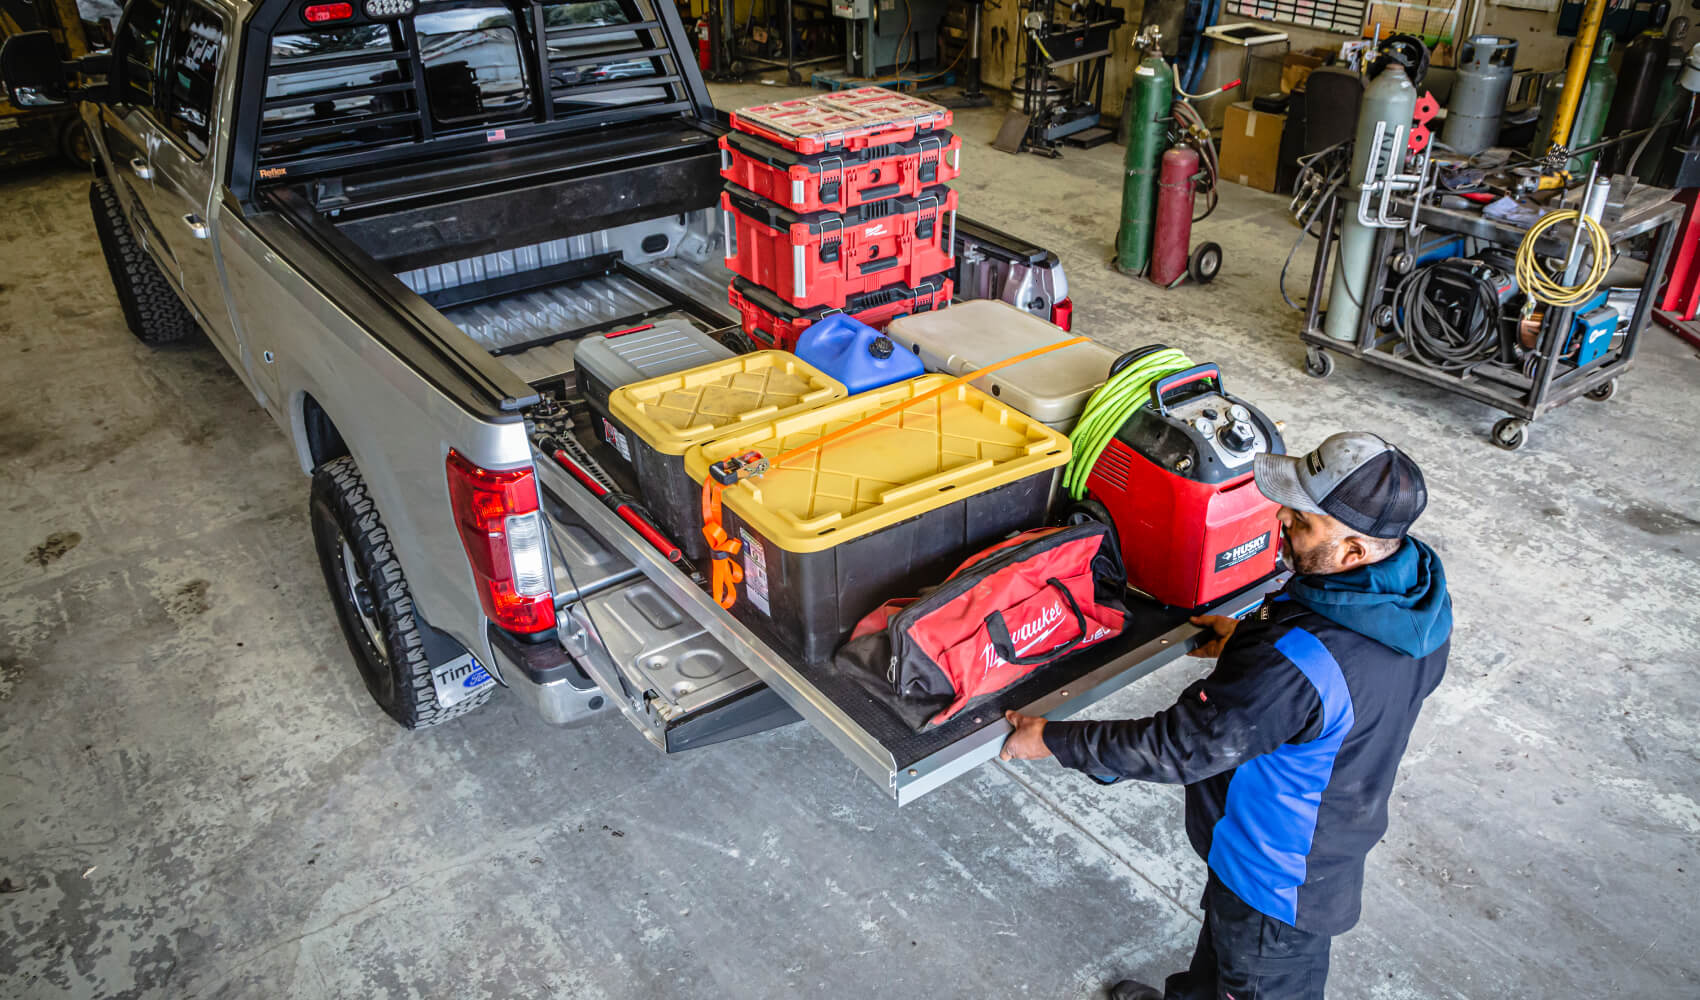 man pulling out a cargoglide loaded down with tools in his shop